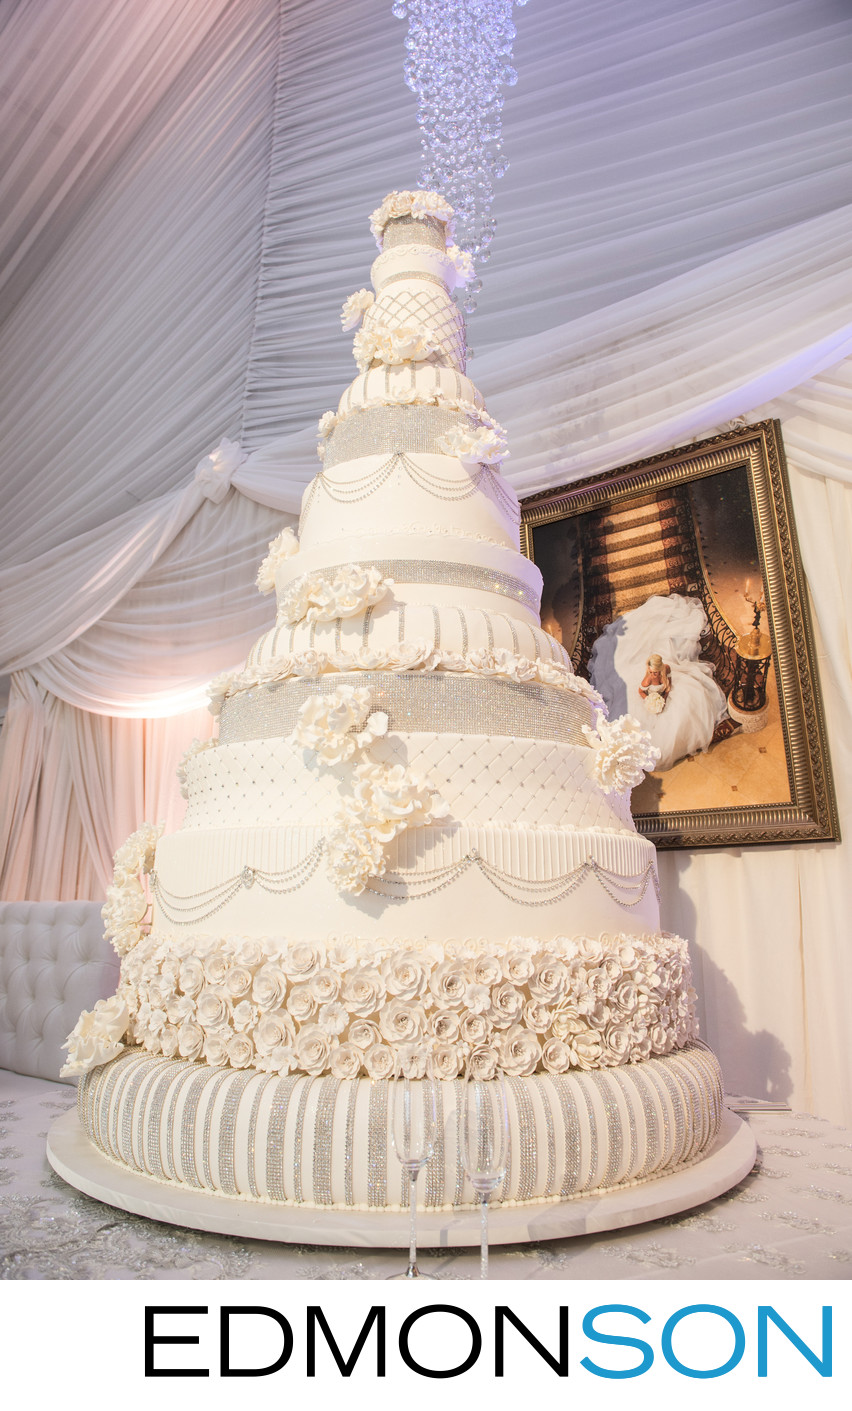 Grand Wedding Cake Towers Over Reception